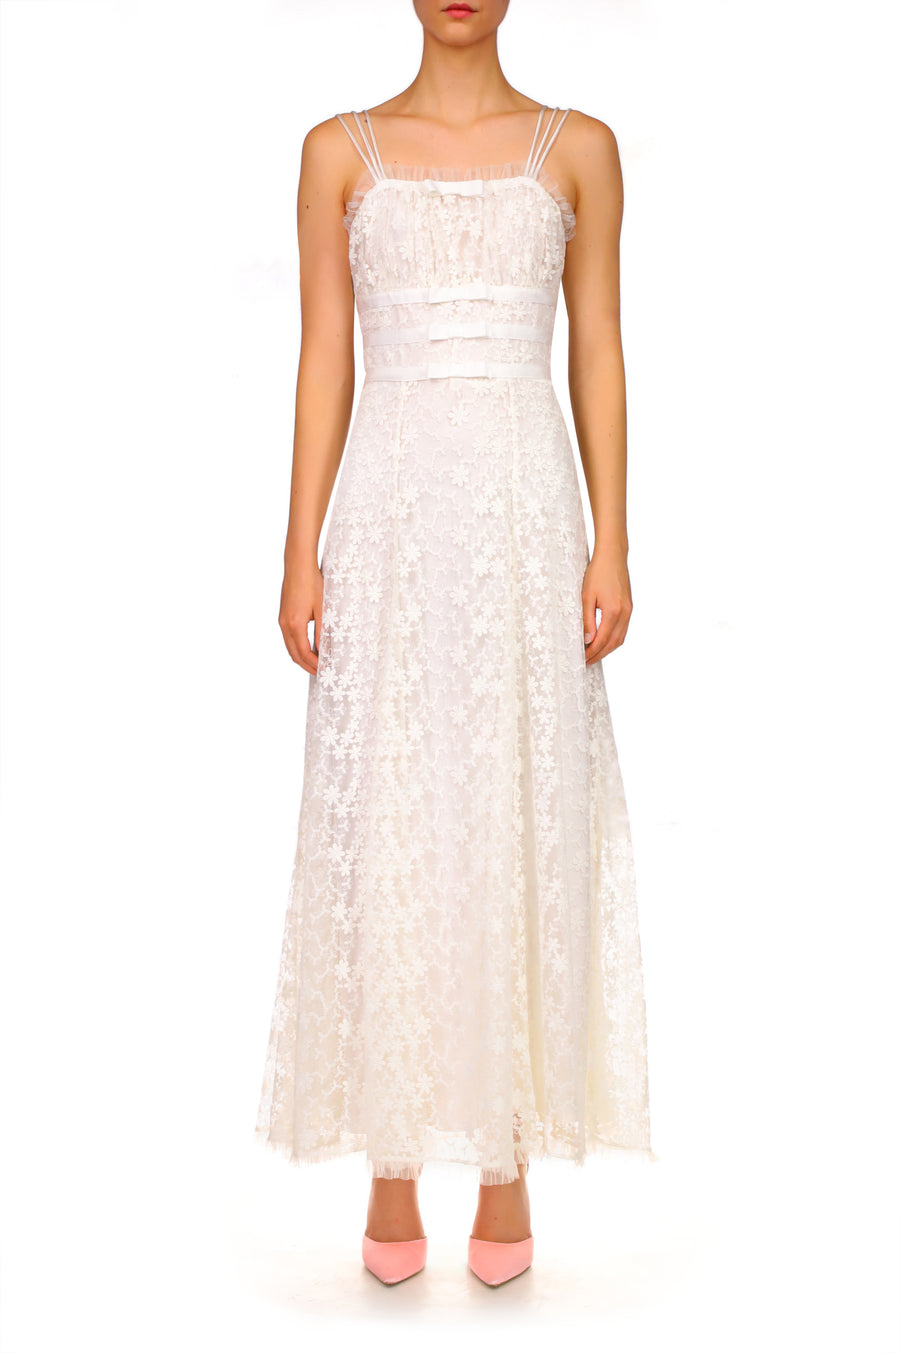 White Daisy Lace Dress With Tulle Ruffle And Ribbon Details – Rodarte